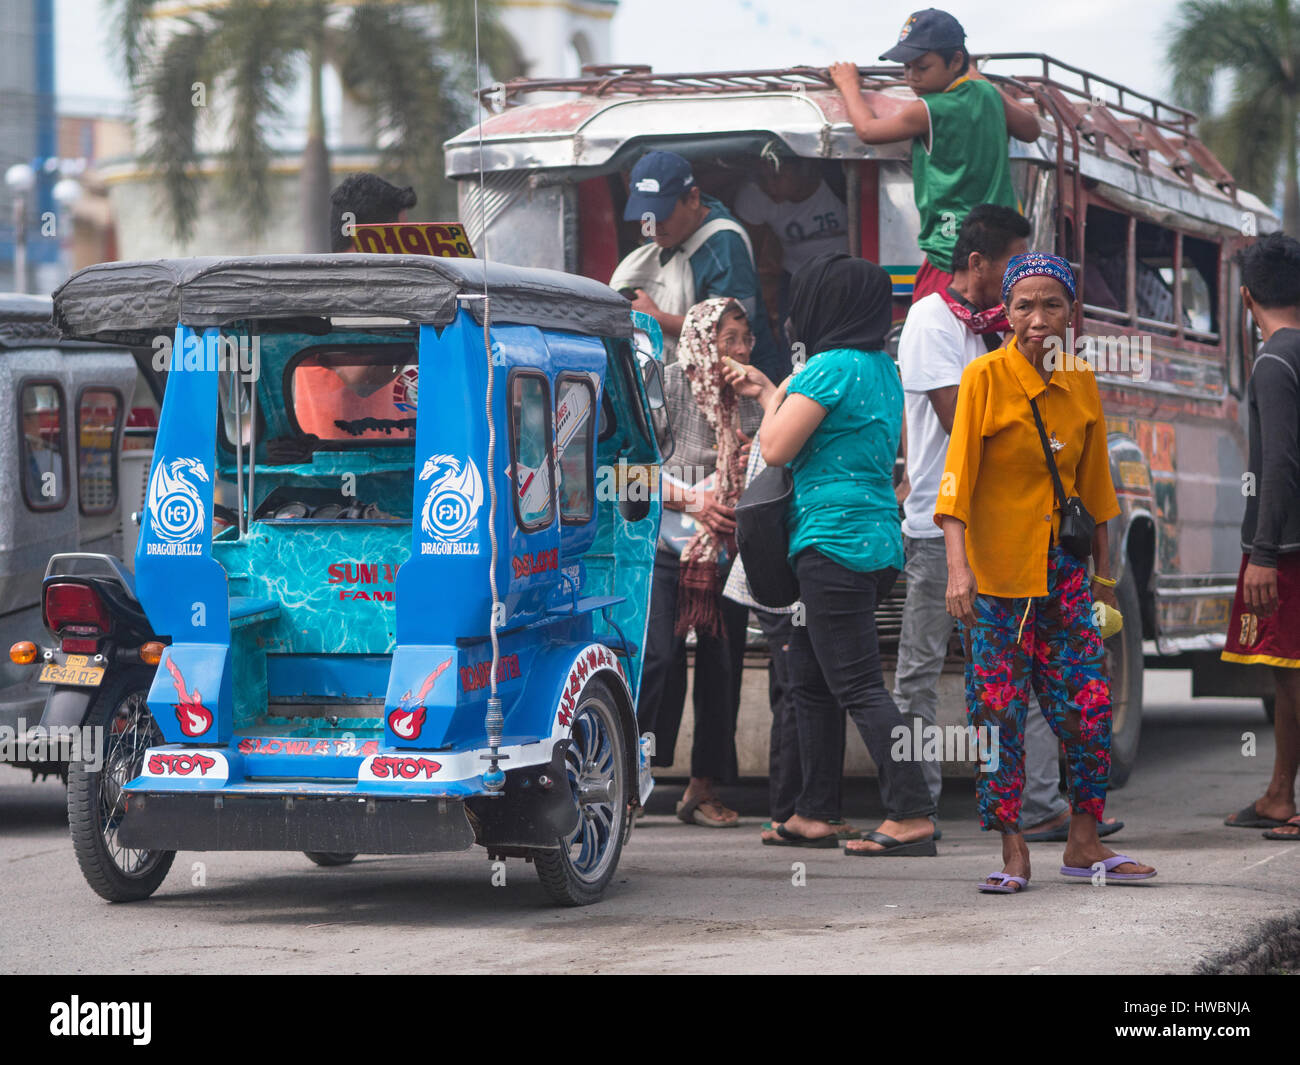 Public transport in Tacurong City, the commercial centre of the Sultan Kudarat province in The Philippines. Stock Photo